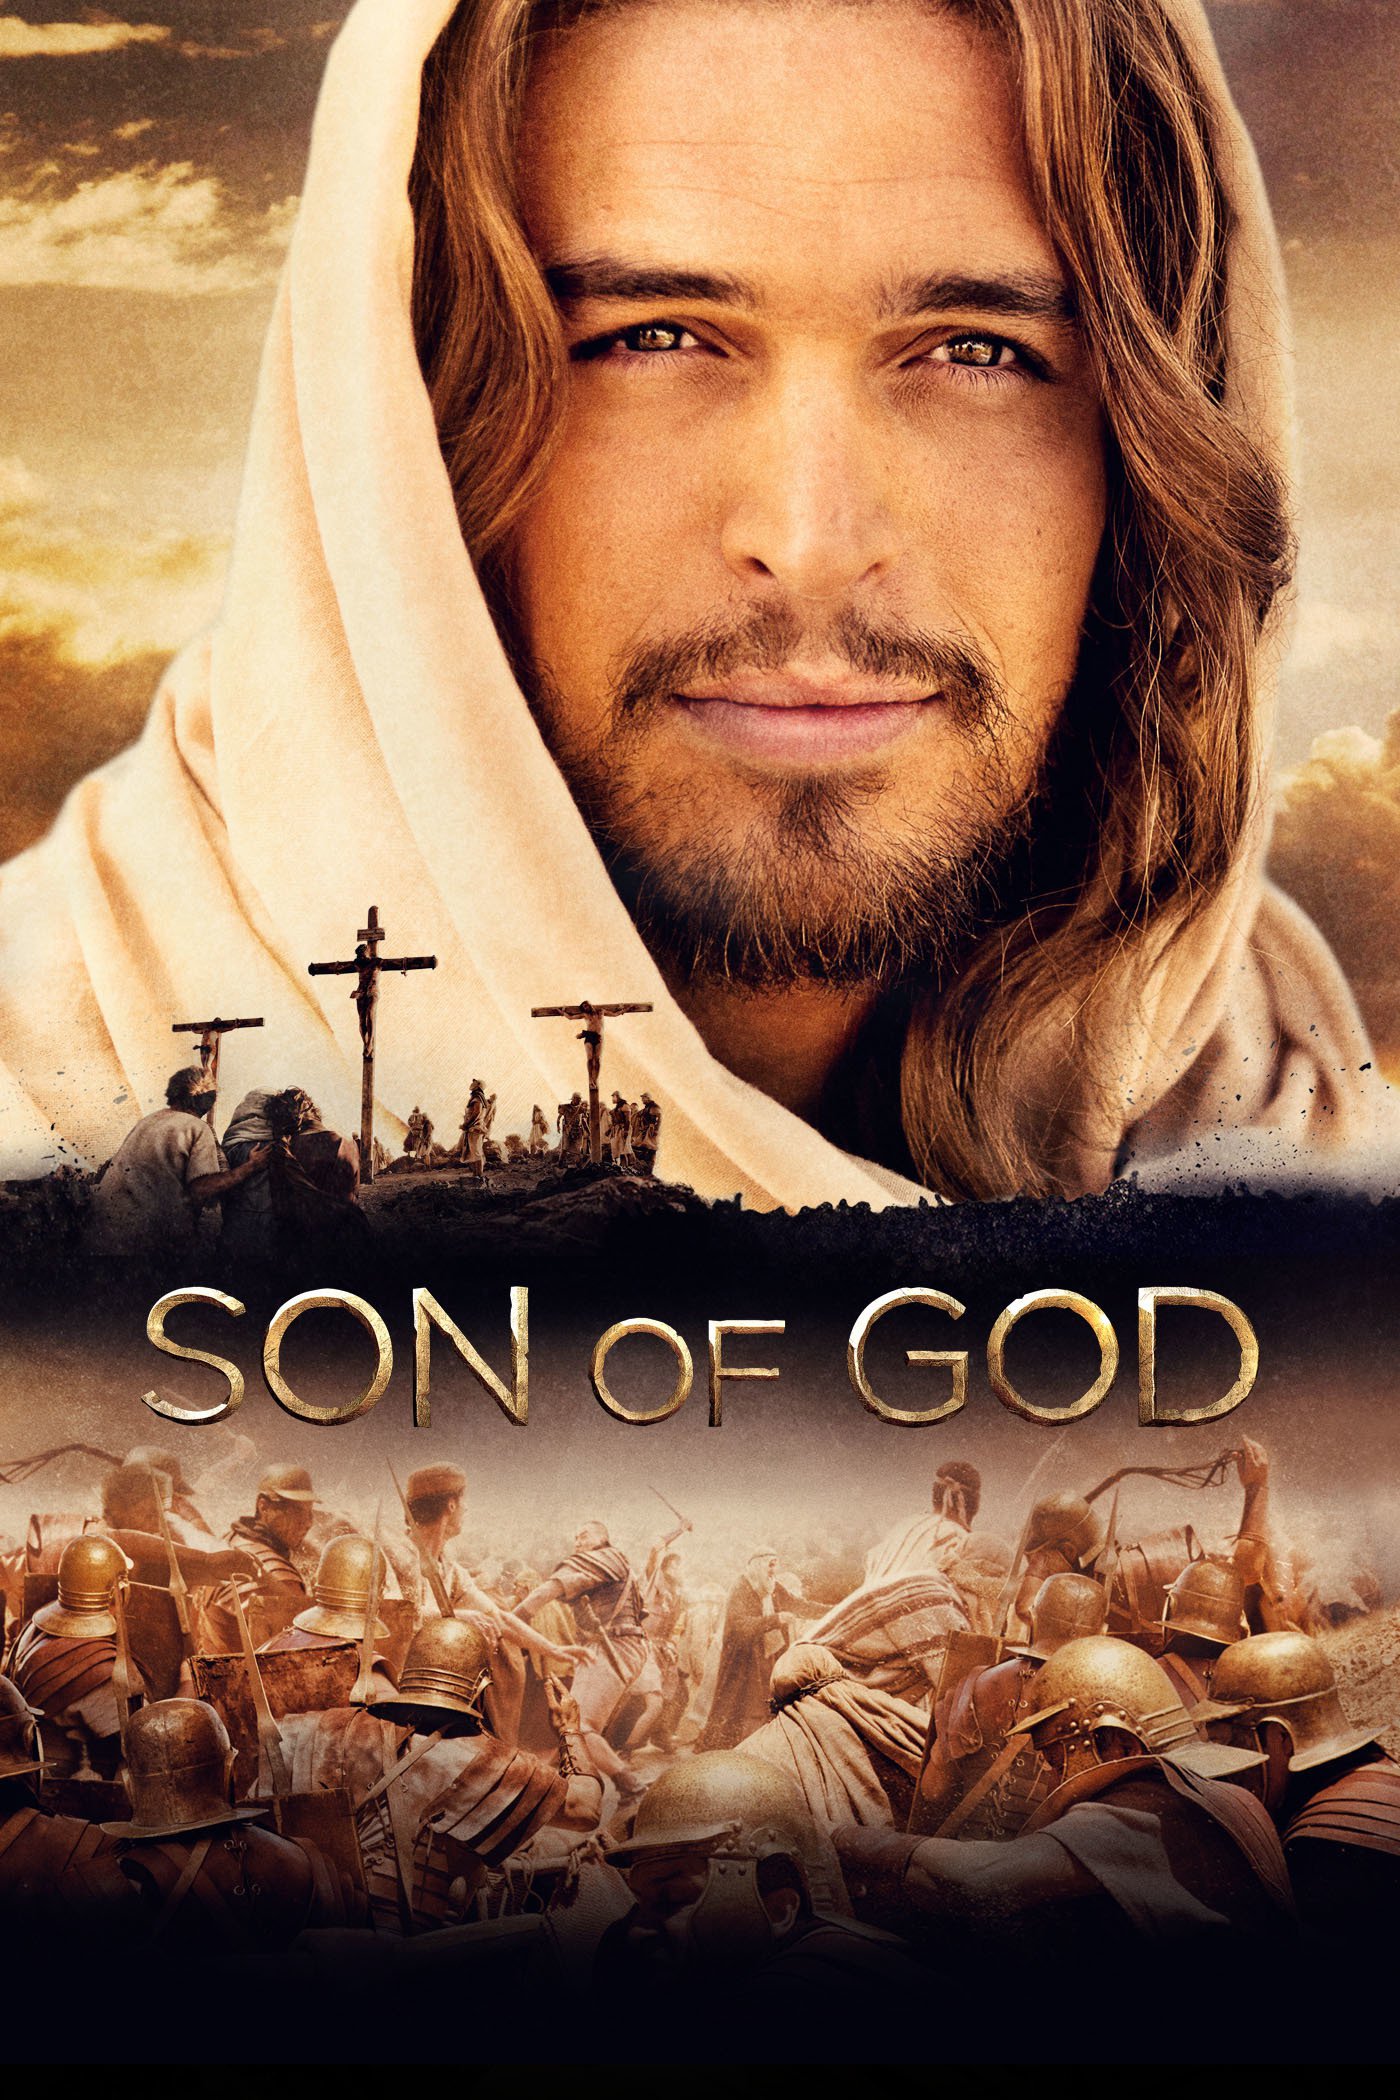 Poster for the movie "Son of God"